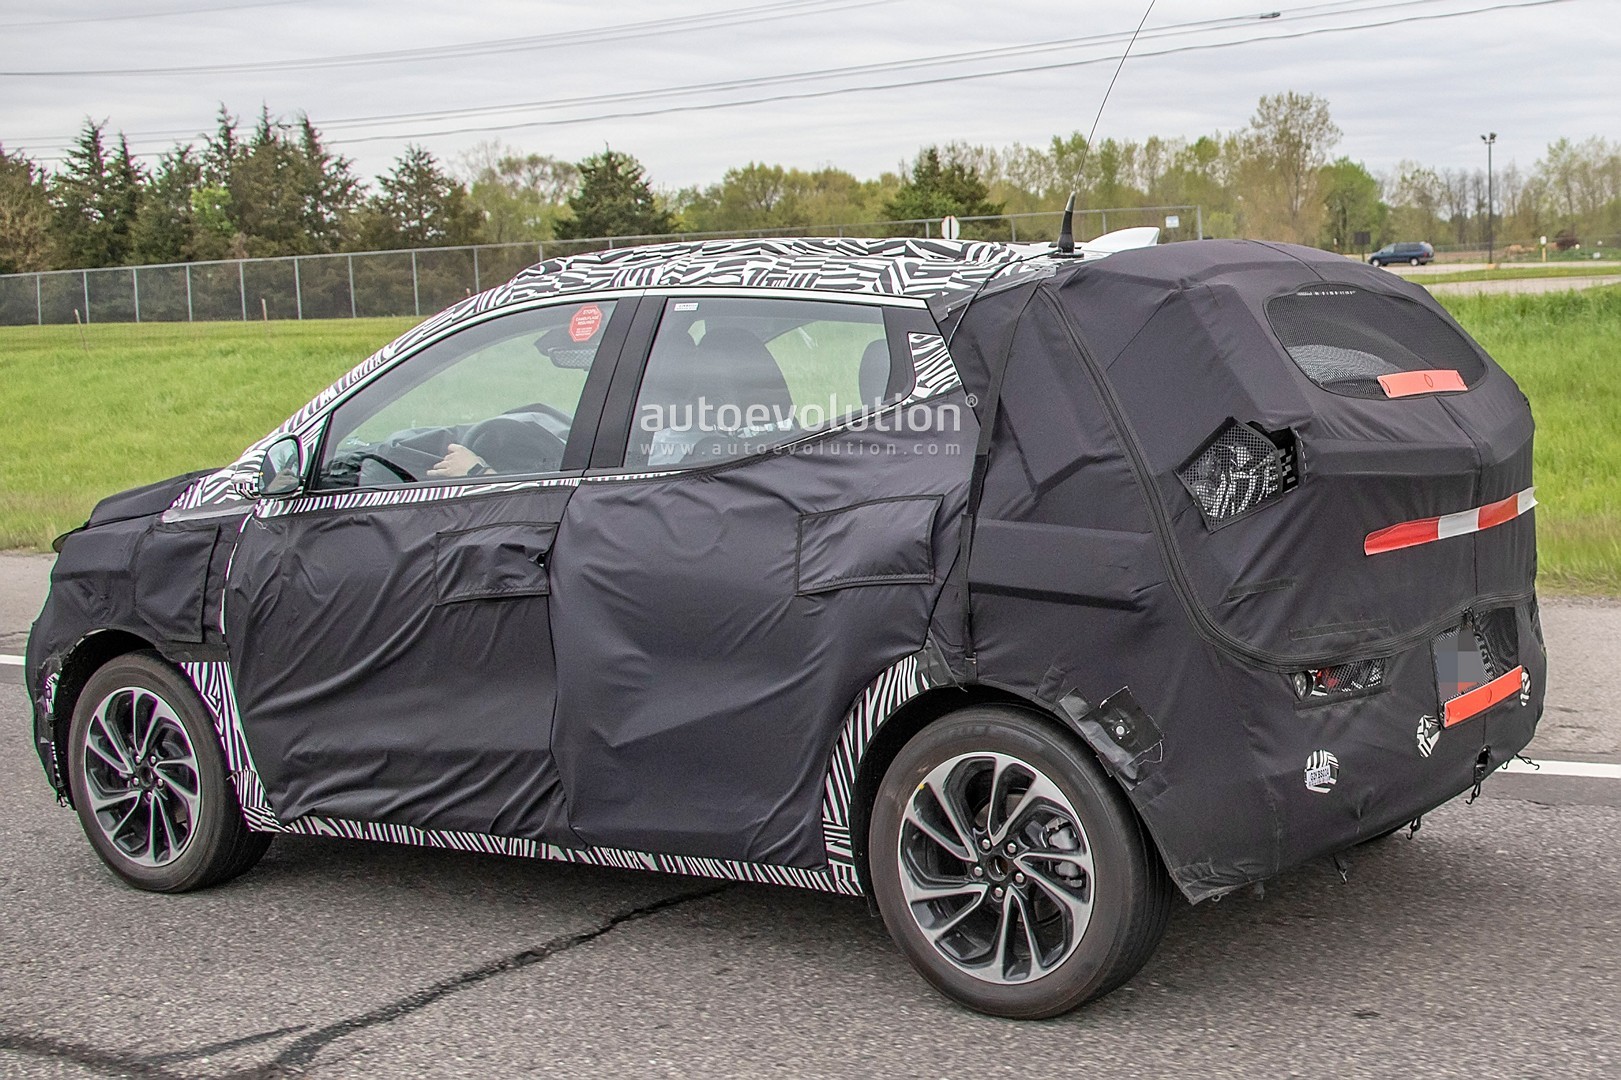 2021 Chevy Bolt Electric Utility Vehicle (EUV) Spied, Is an Electric